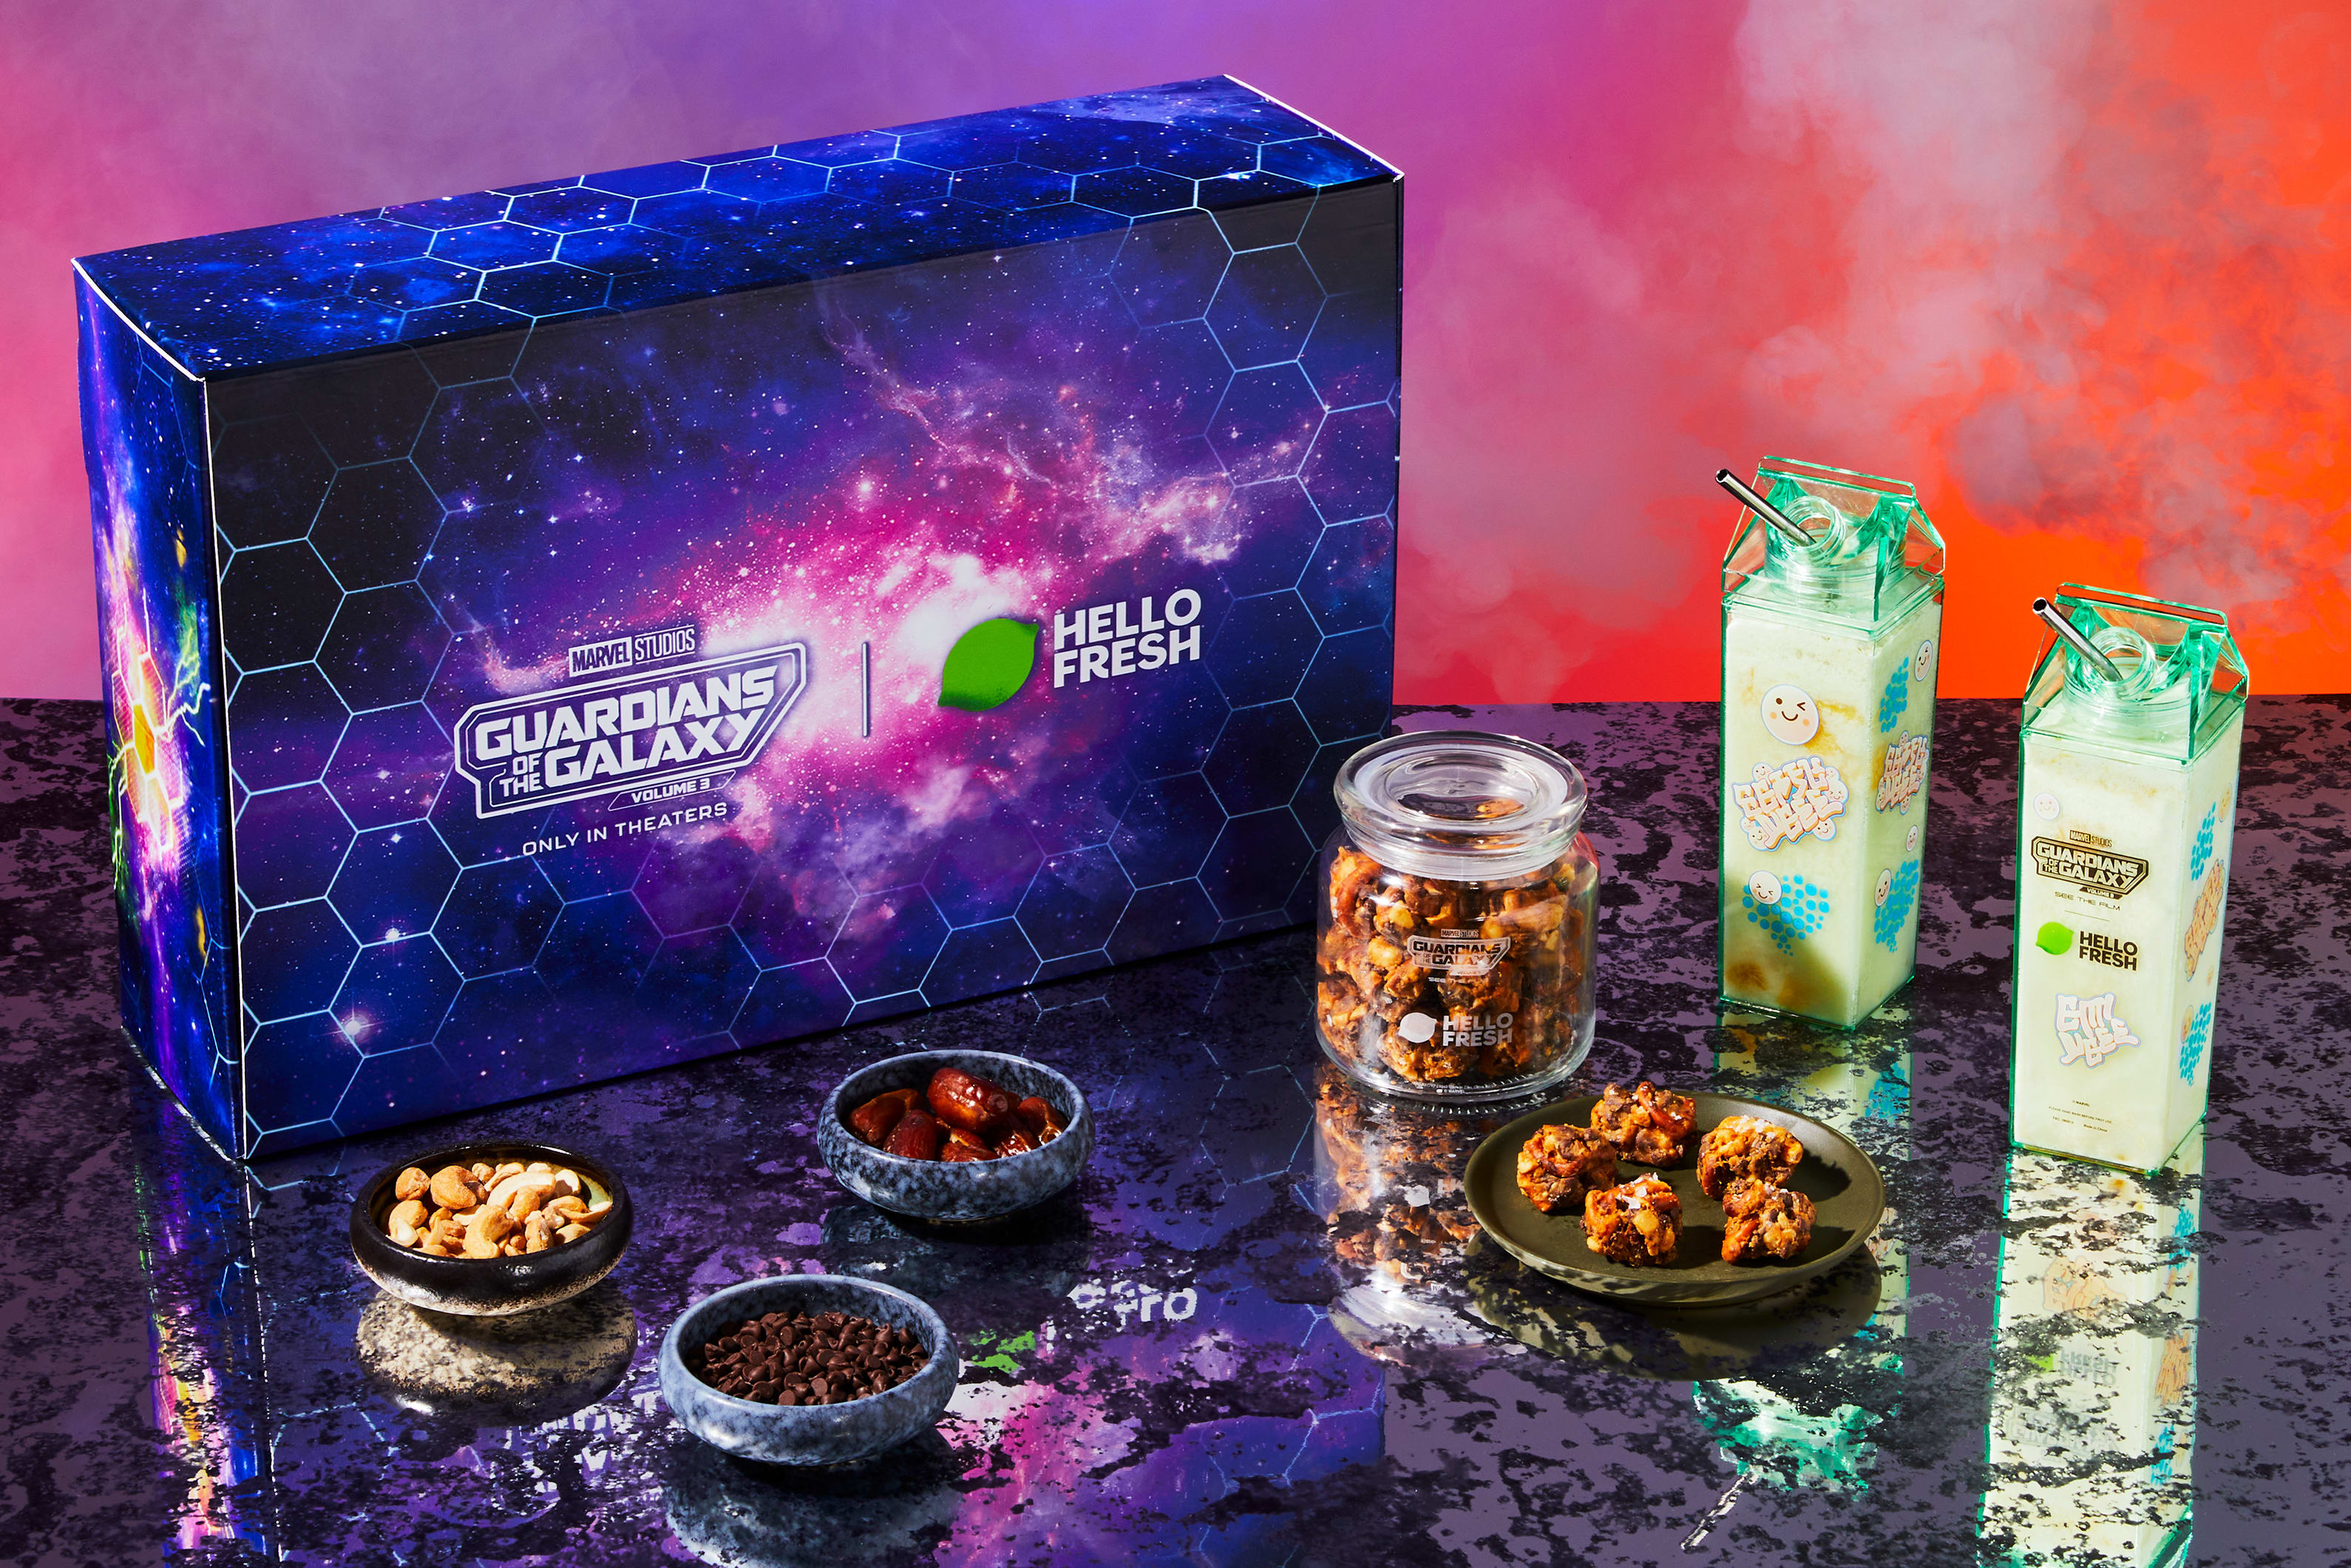 Ready to transport your taste buds to a flavourful, new galaxy?